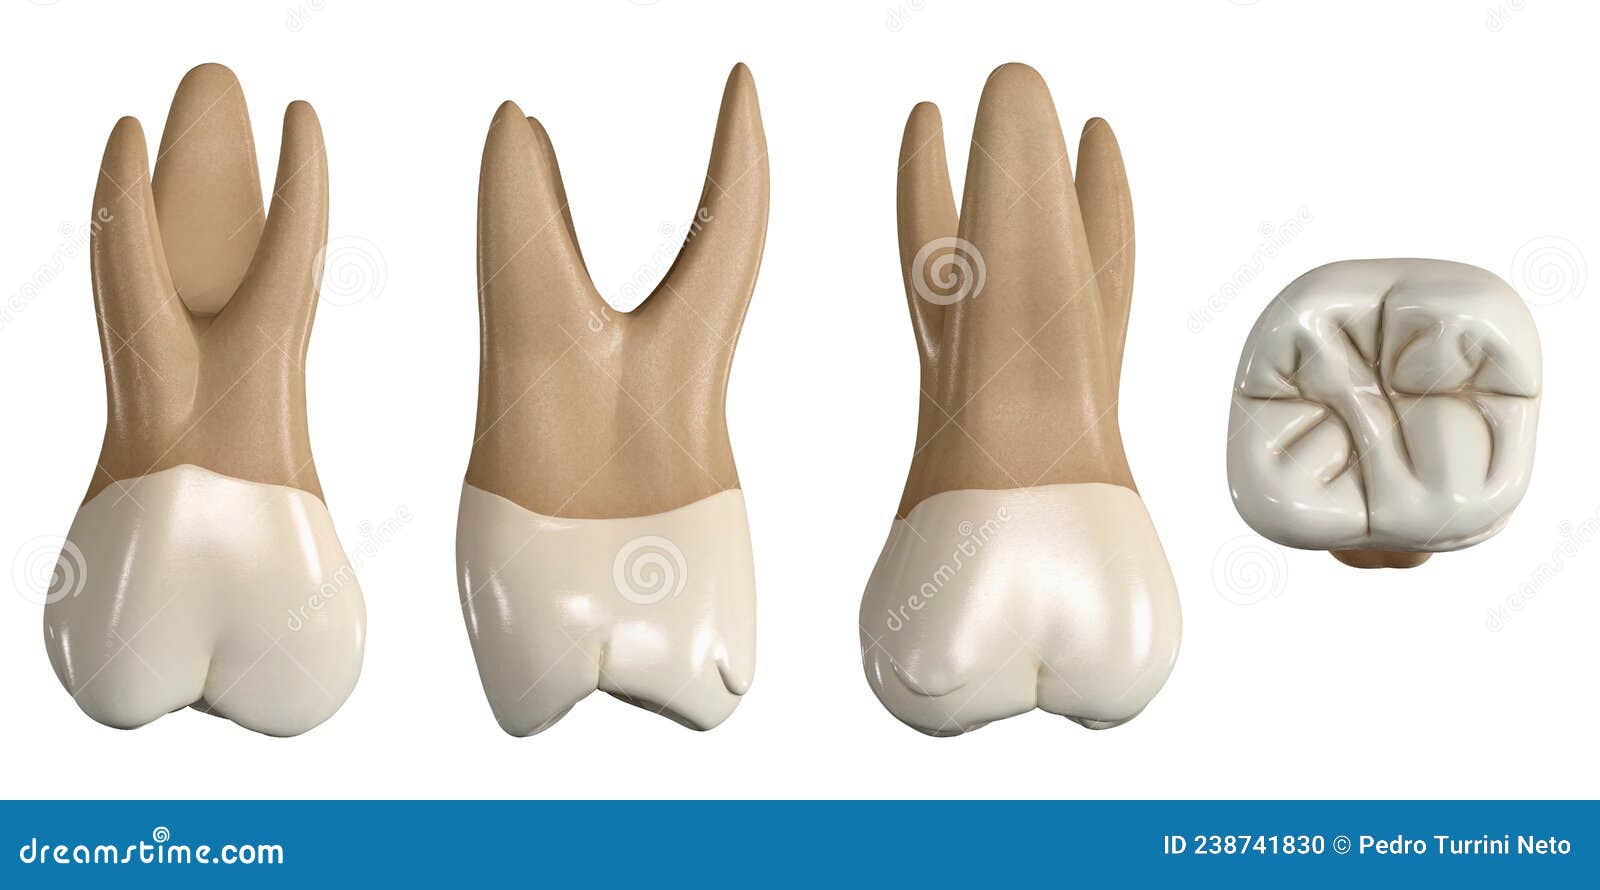 permanent upper first molar tooth. 3d  of the anatomy of the maxillary first molar tooth in buccal, proximal, lingual